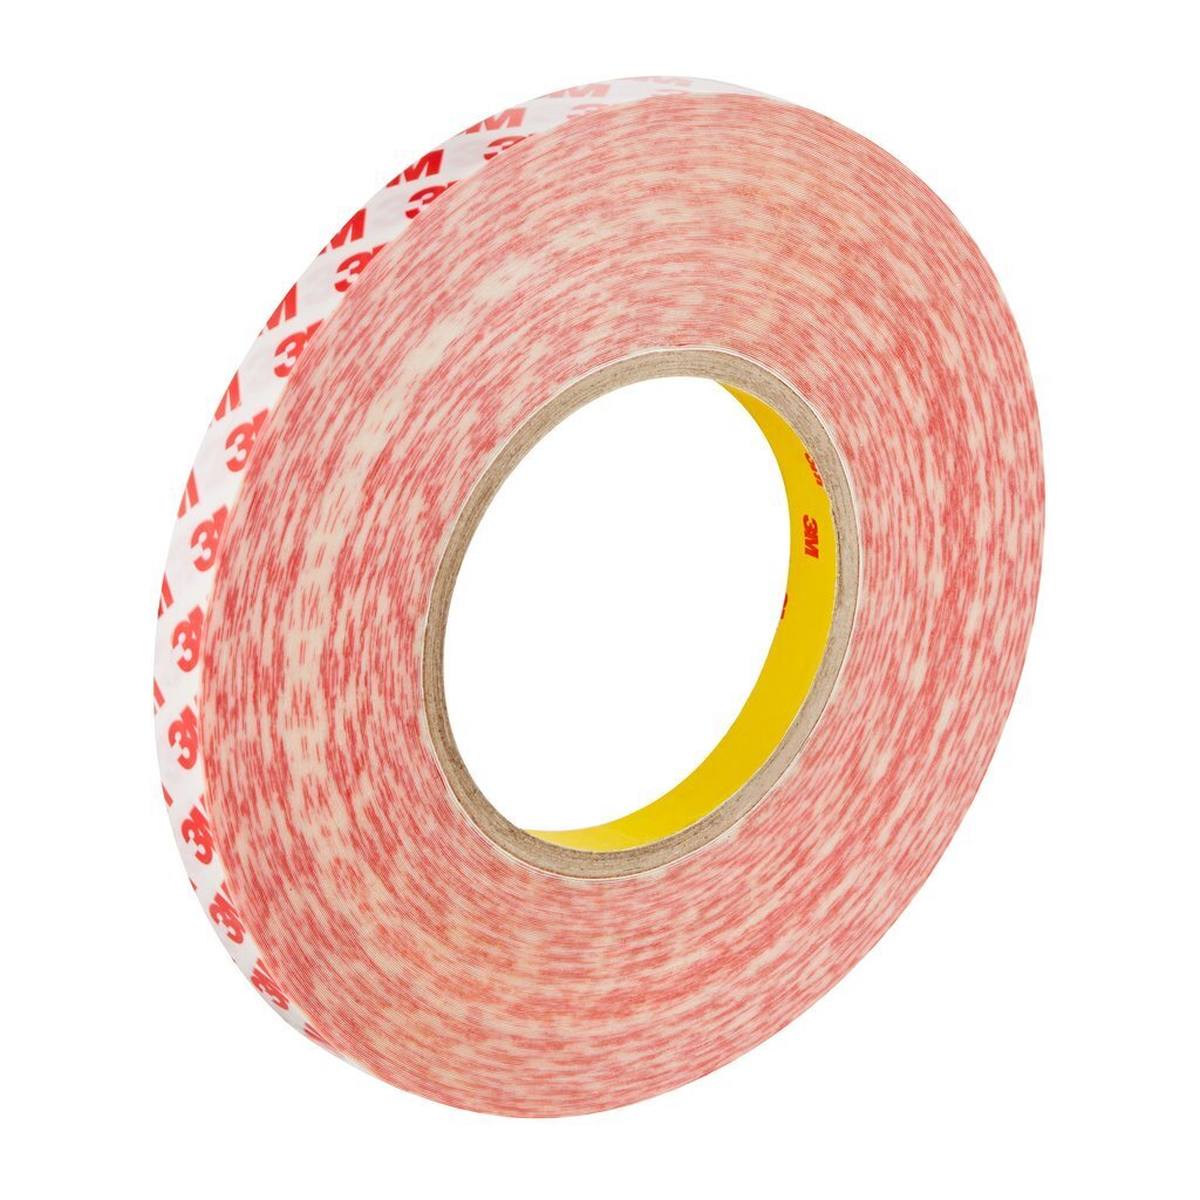 3M Double-sided adhesive tape with polyester backing GPT-020F, transparent, 19 mm x 50 m, 0.202 mm